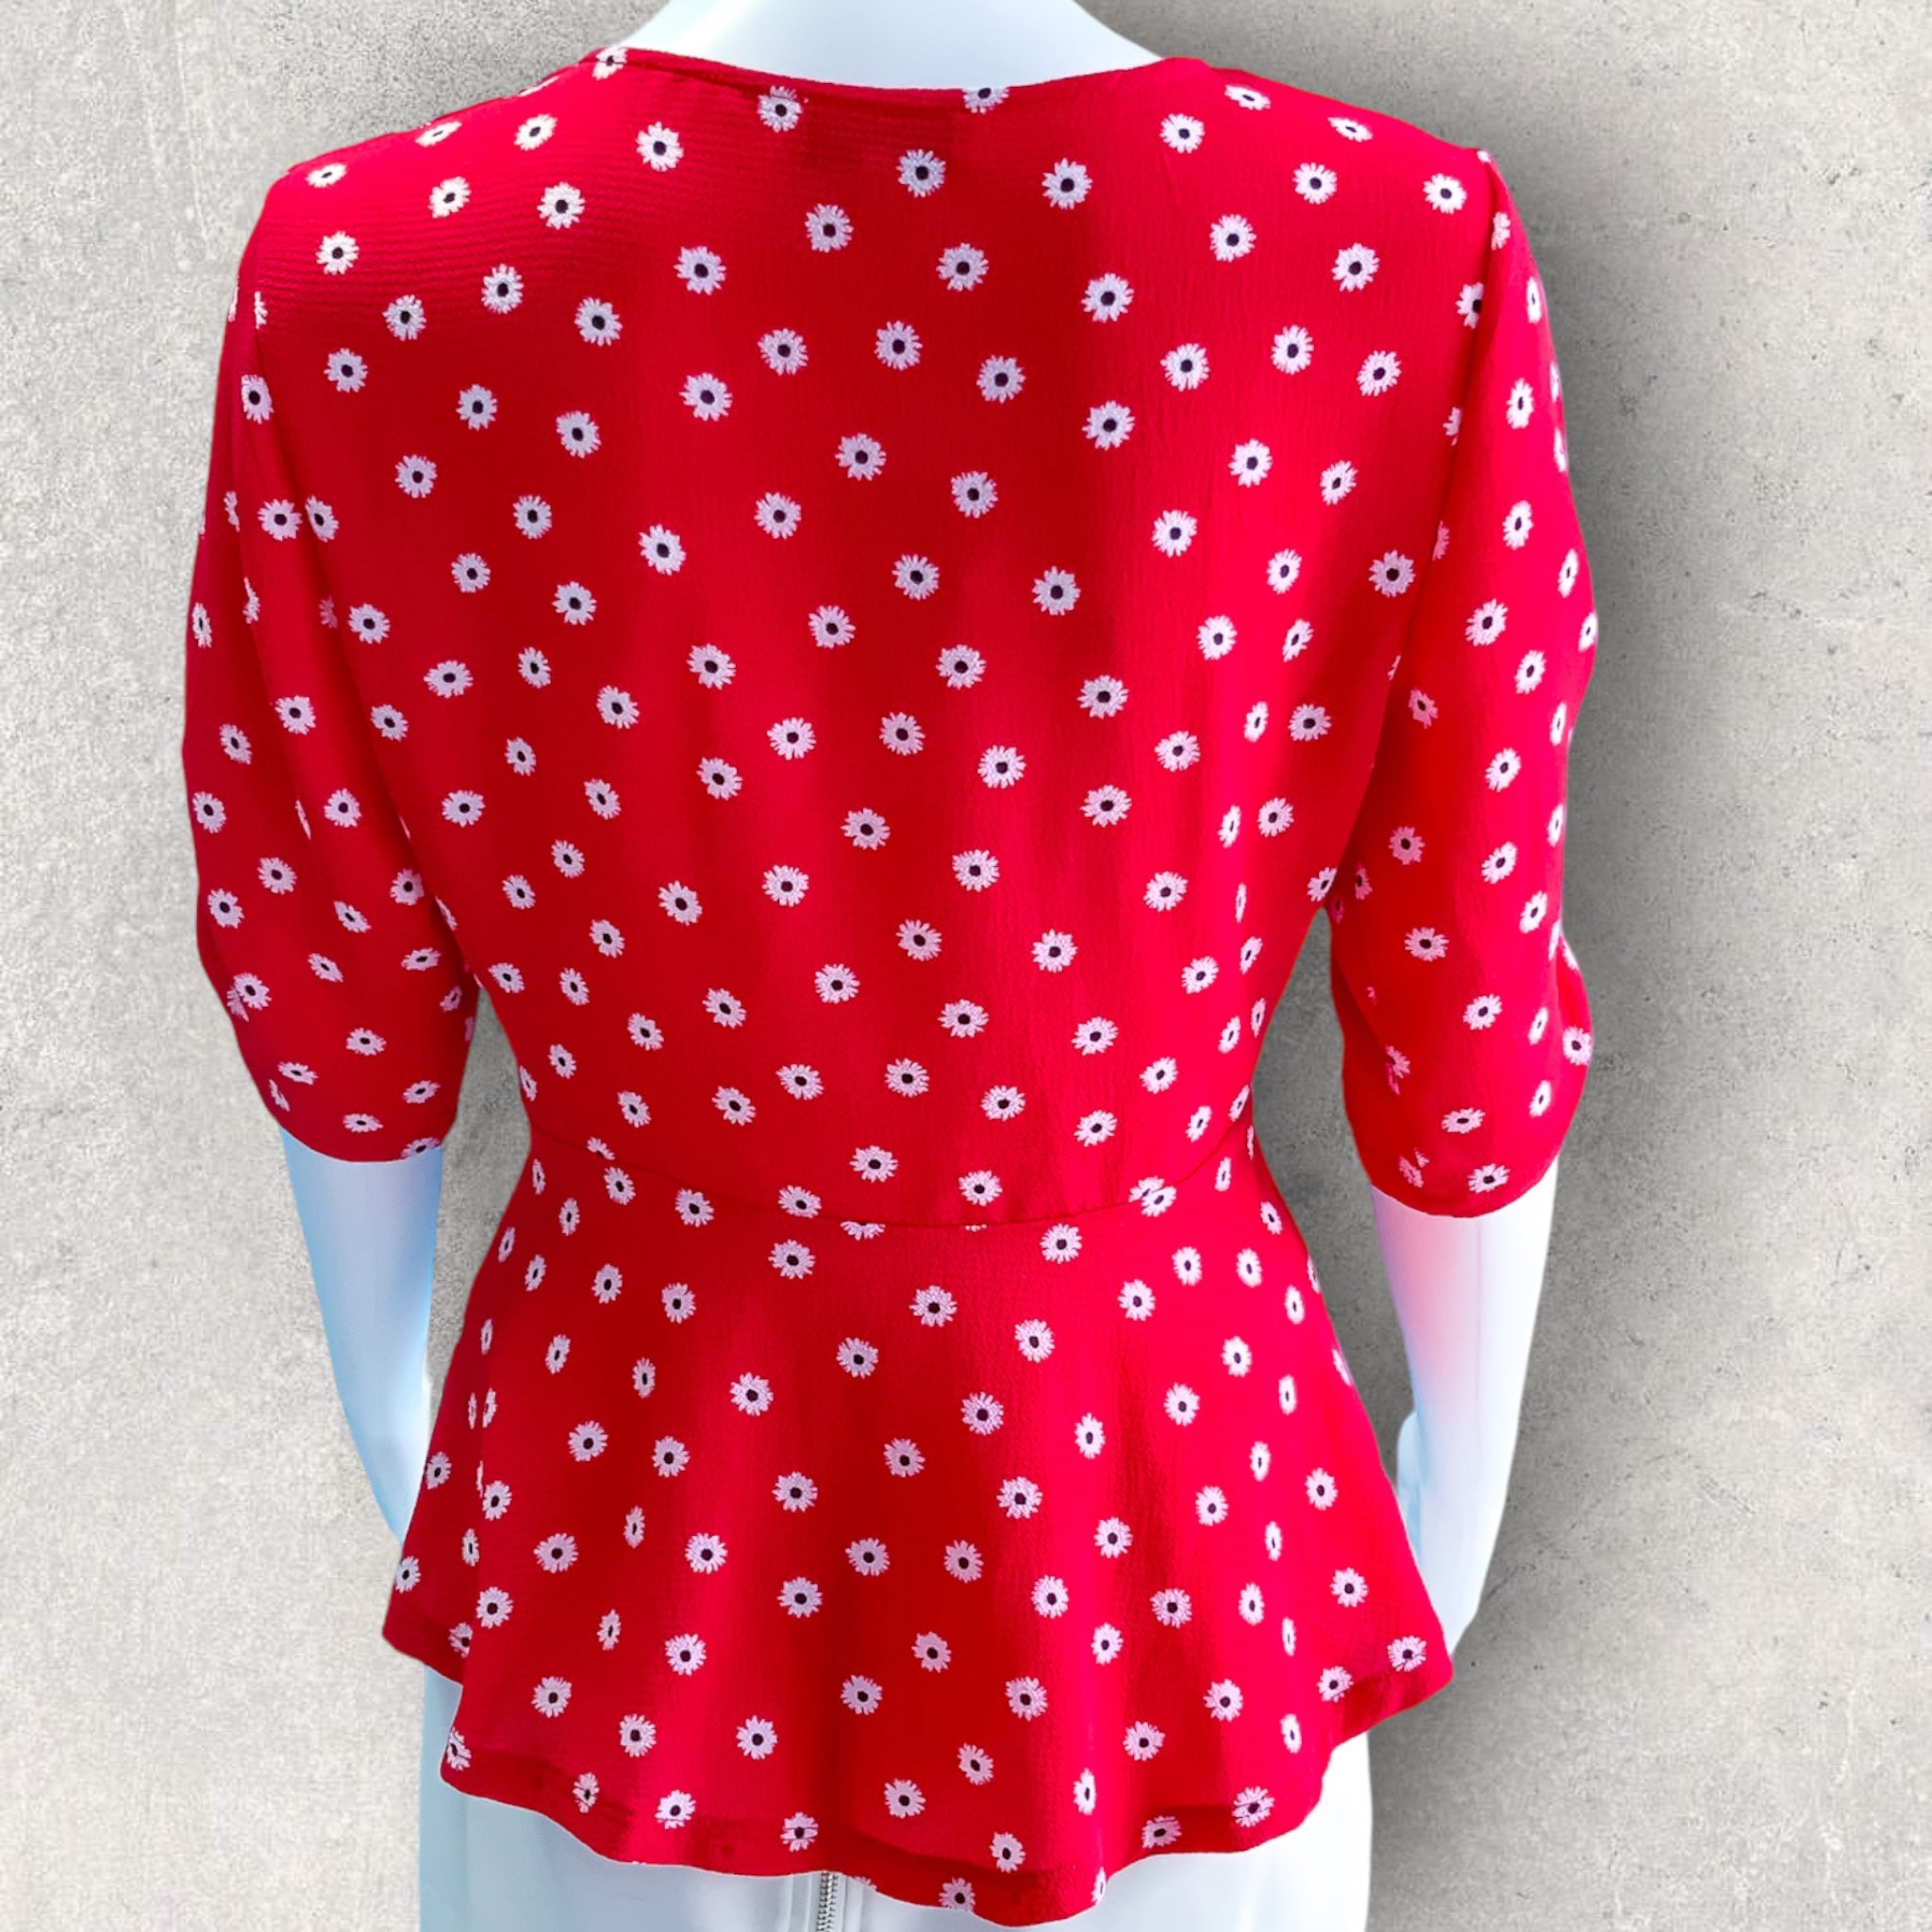 MISS SHOP Red Floral Daisy Print V Neck Top/Blouse - Size 8